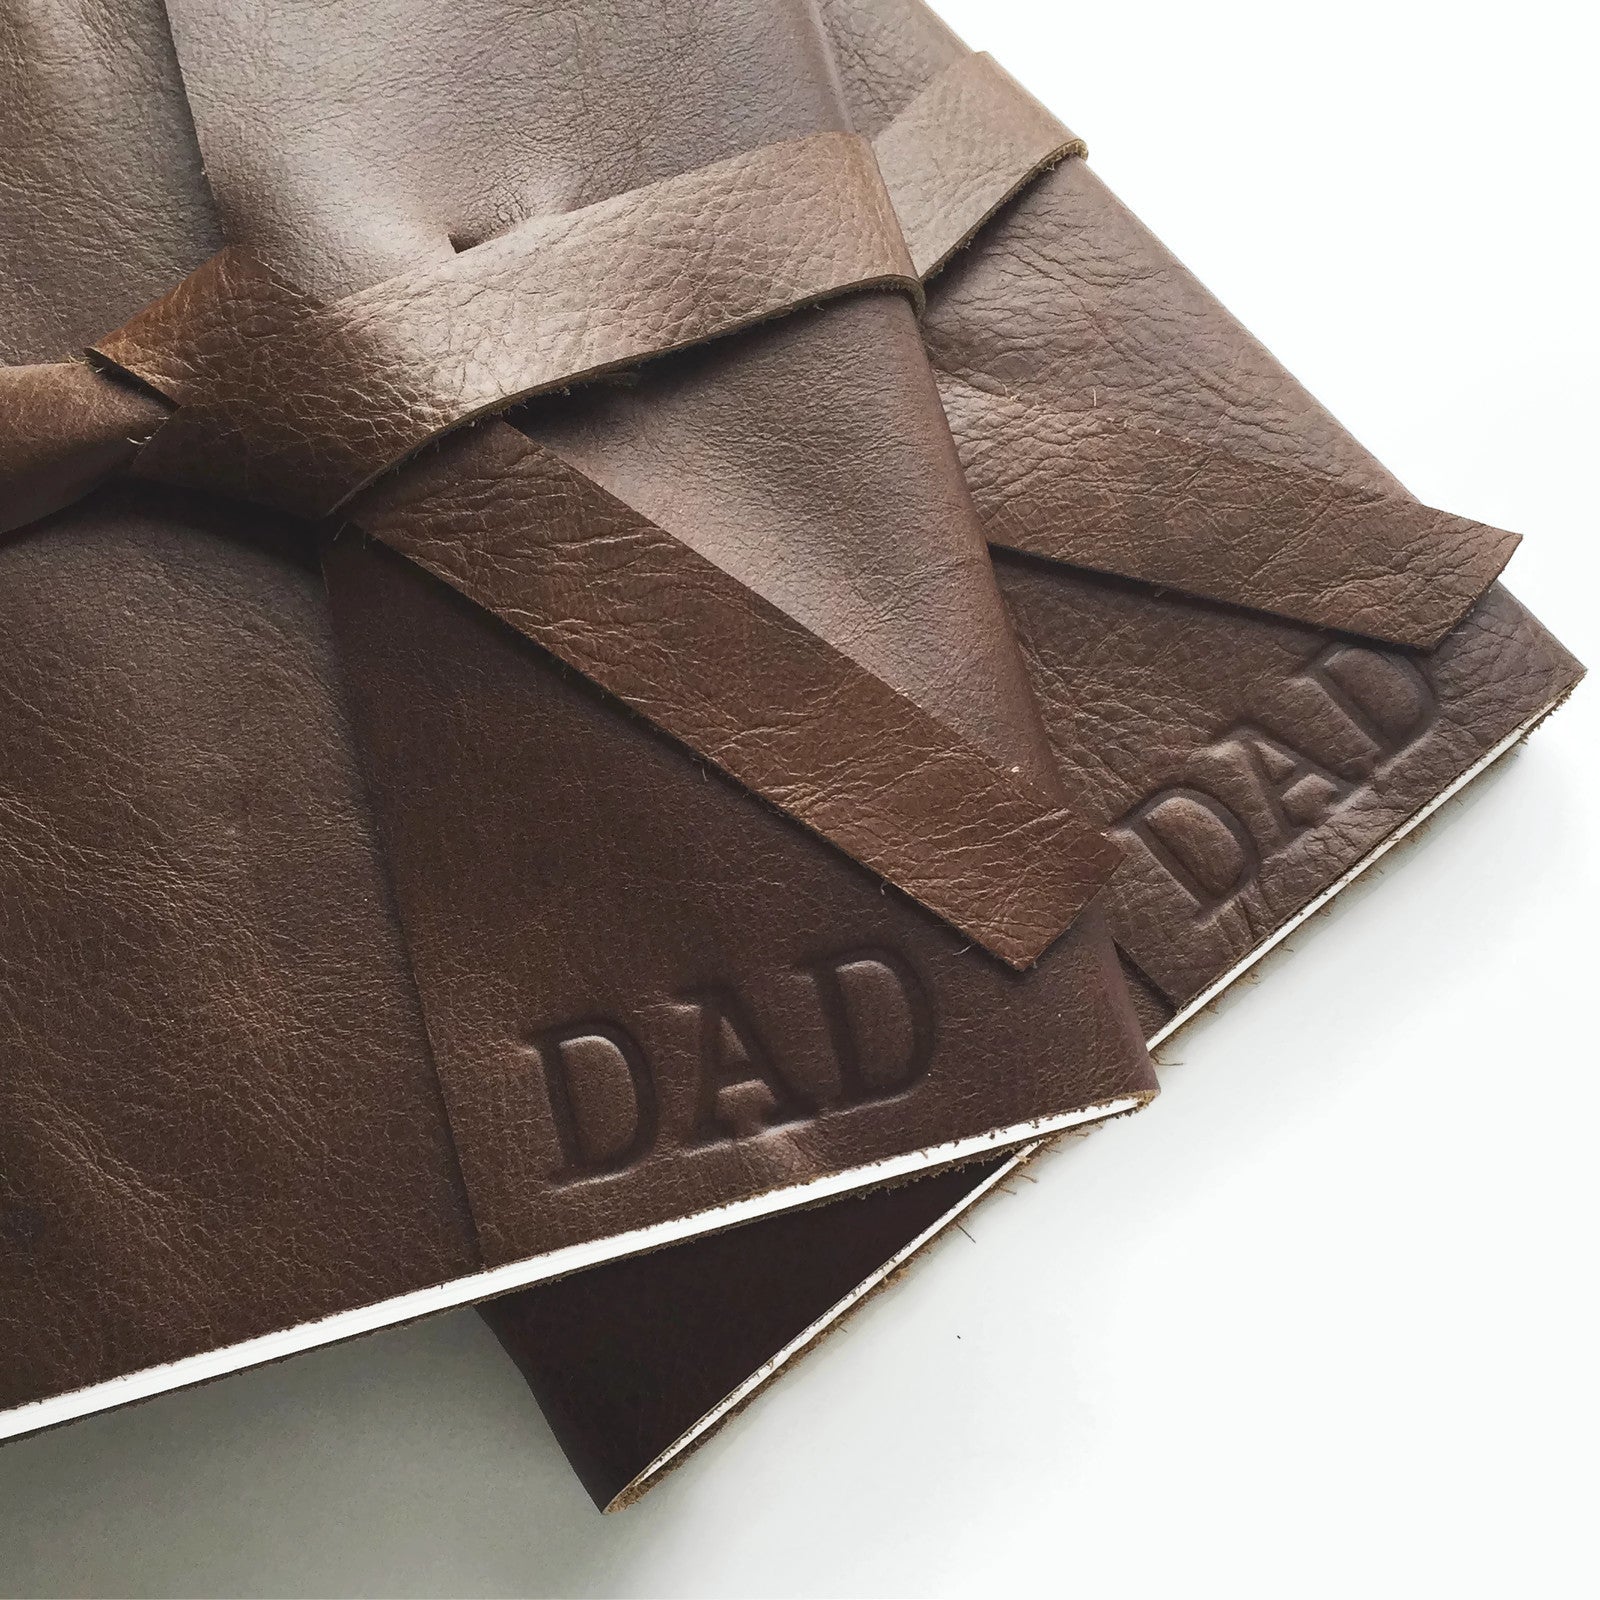 2 Journals Personalized with DAD